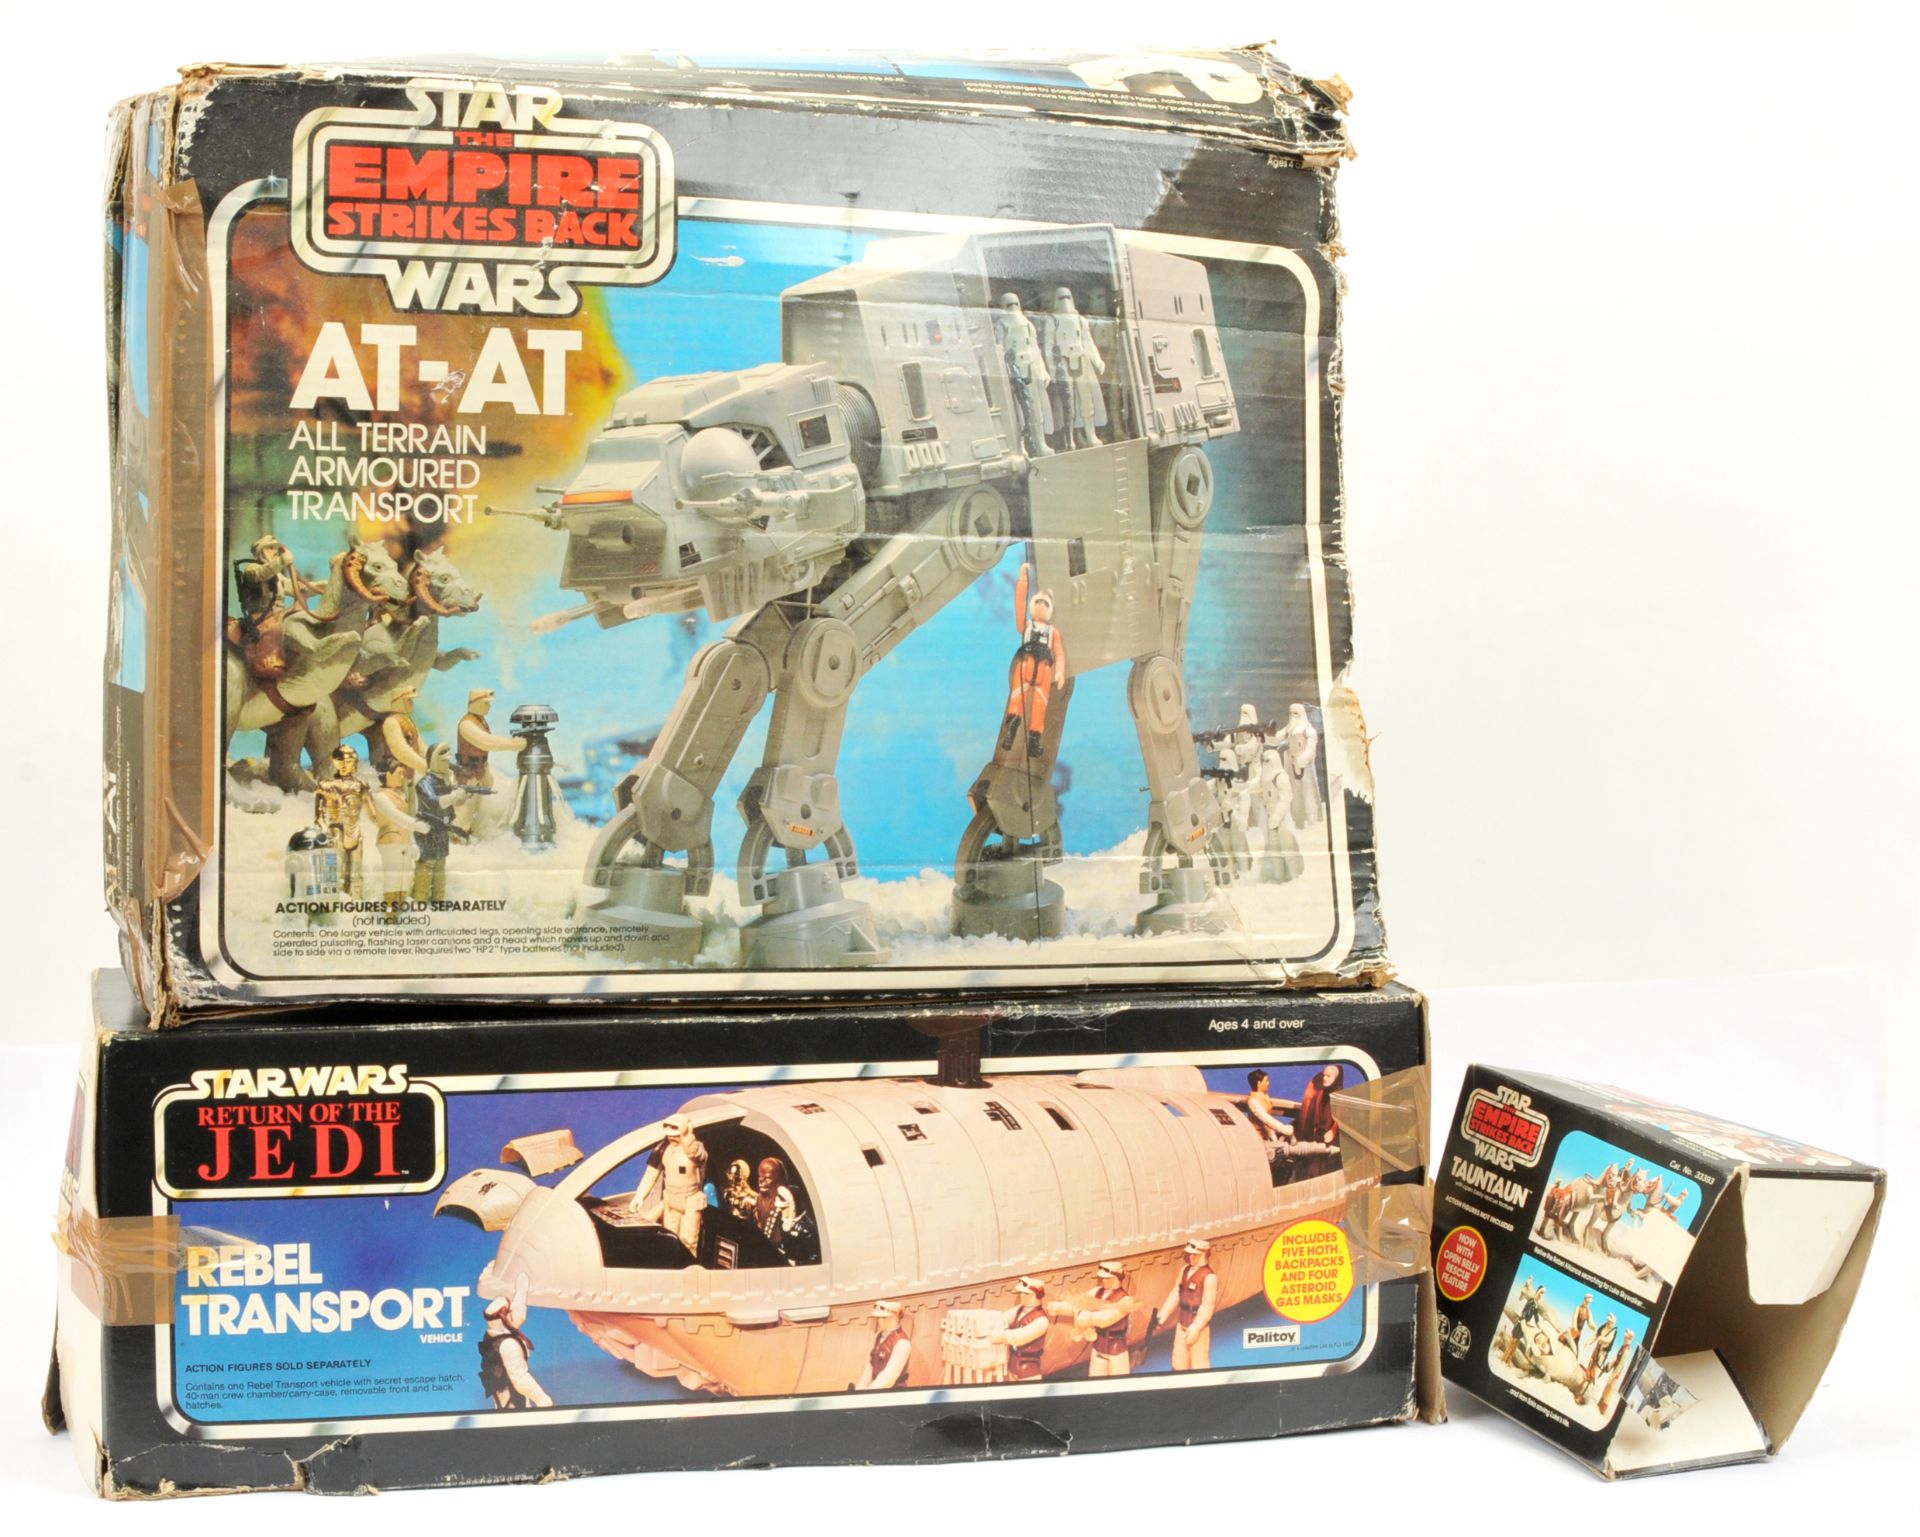 Palitoy Star Wars vintage vehicles and creatures x 3 - Image 3 of 3